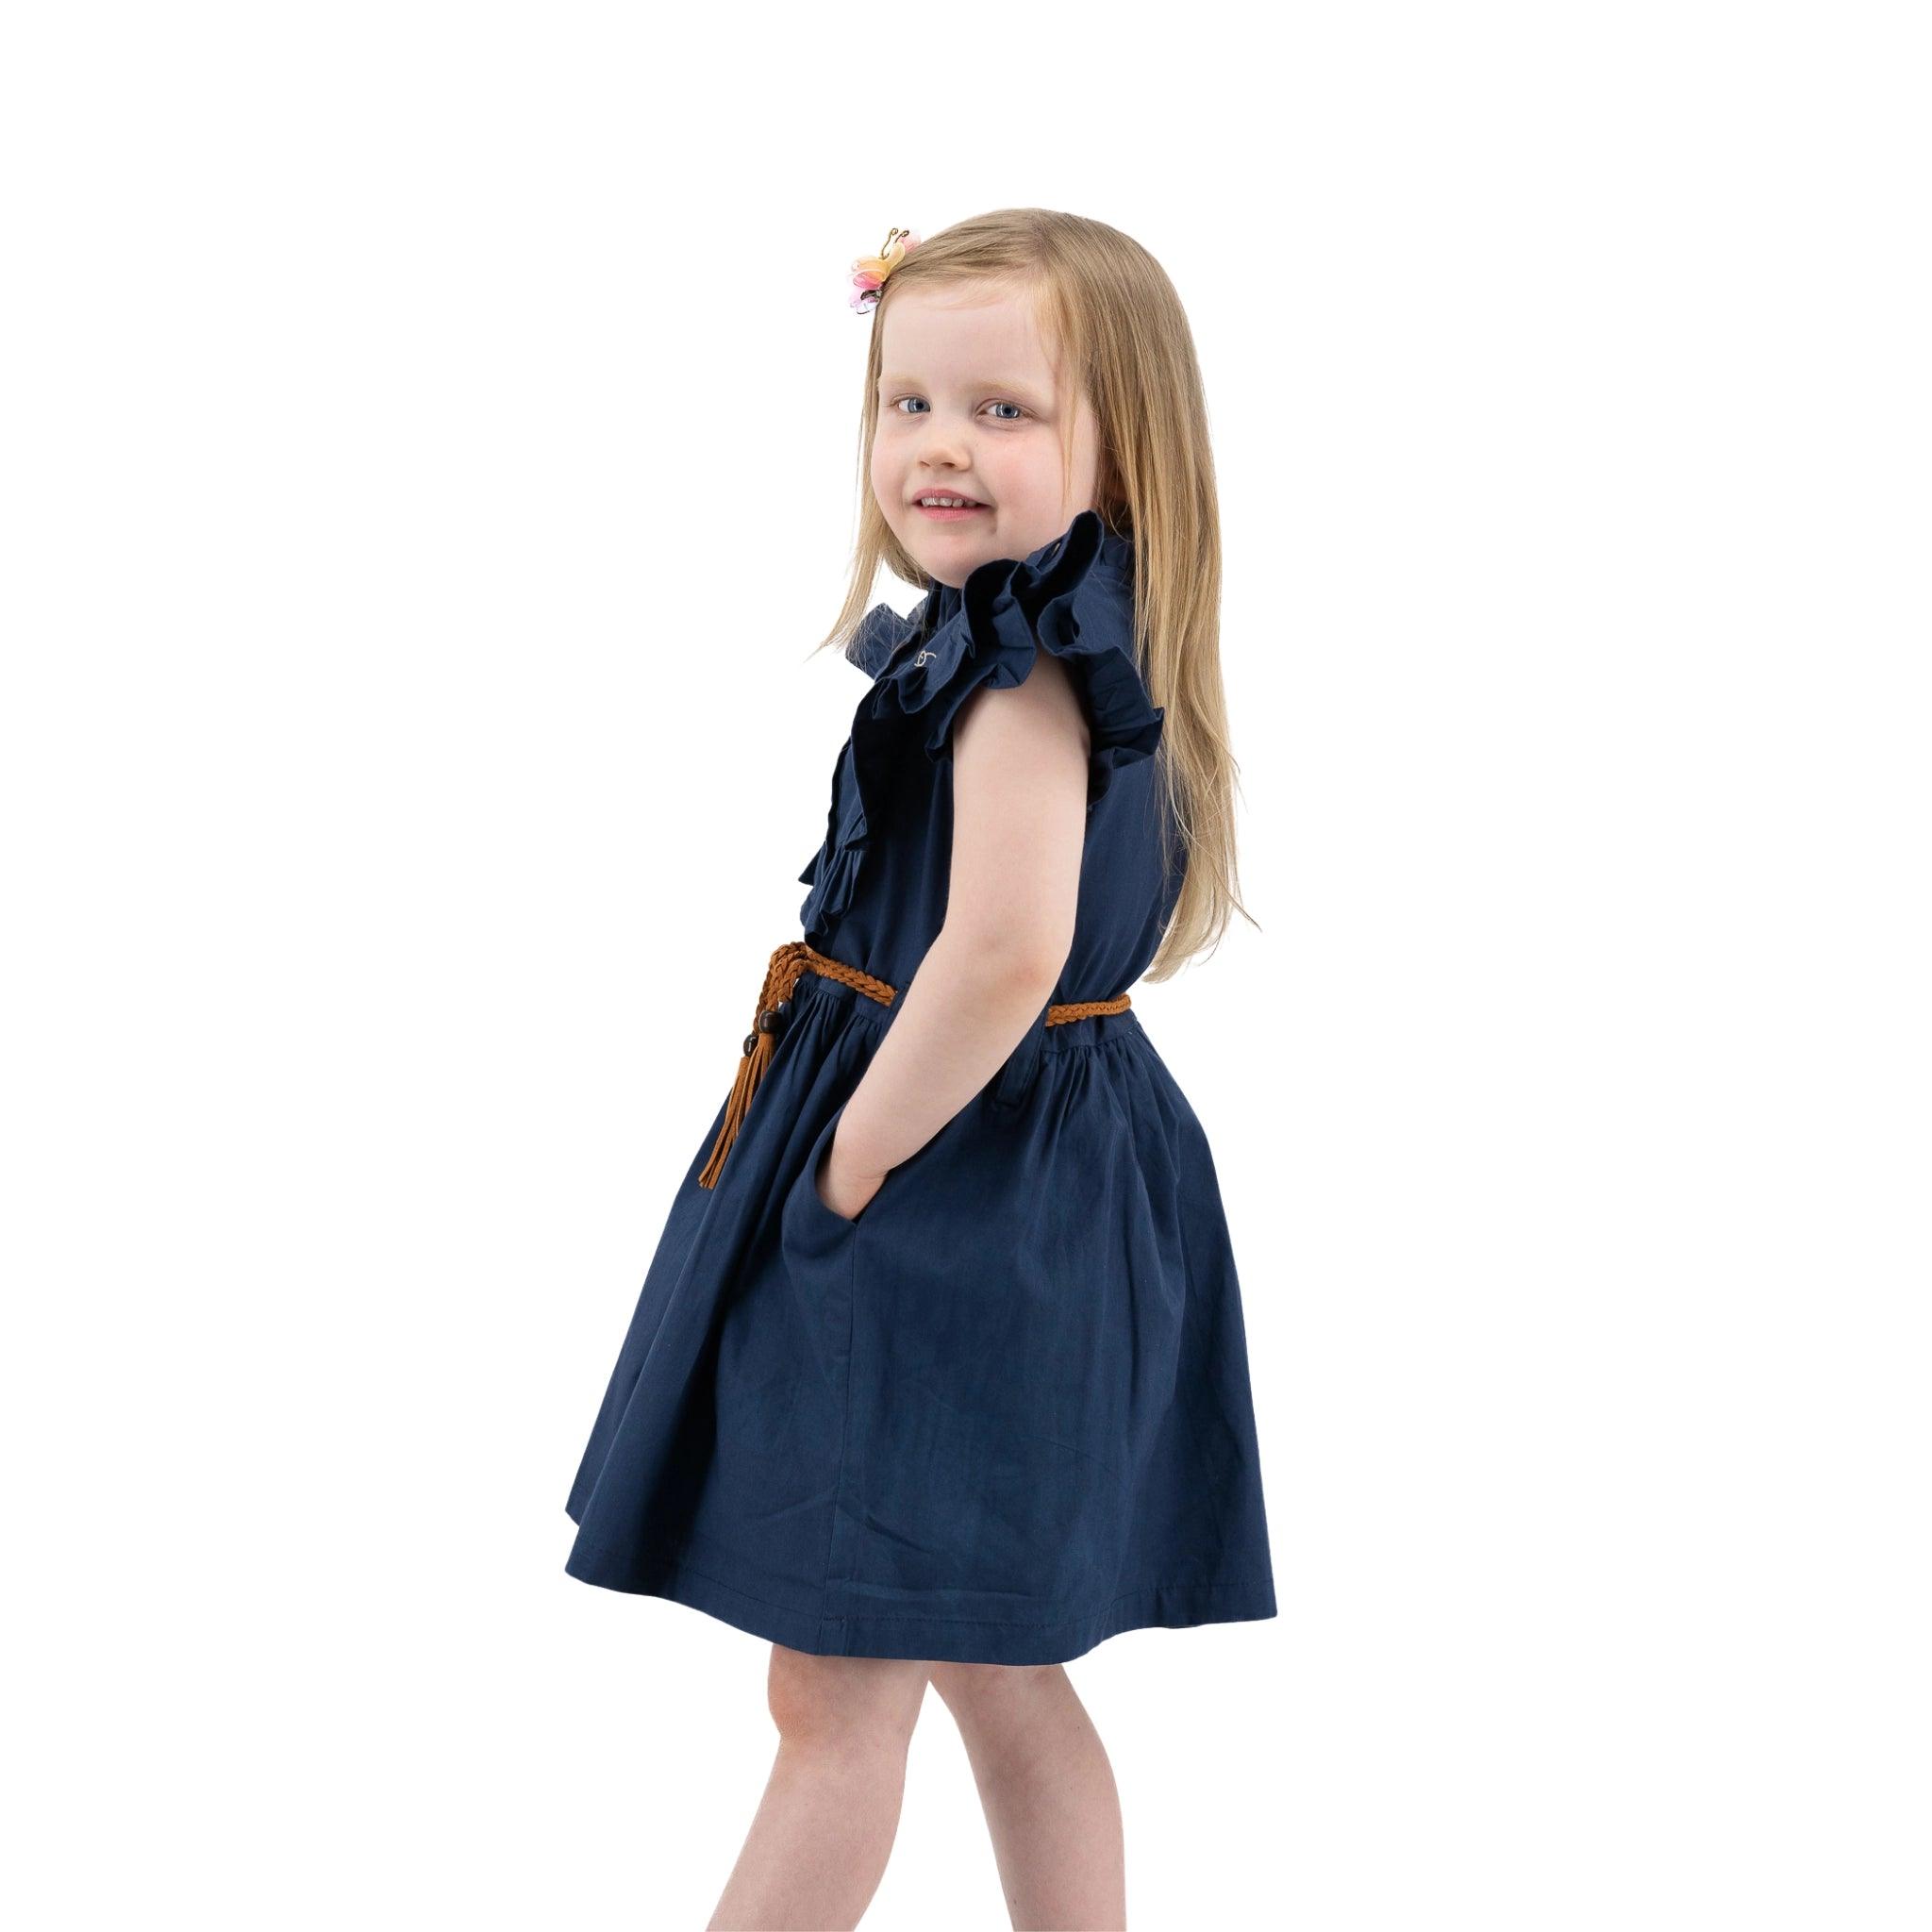 A young girl in a Karee Navy Blue Butterfly Sleeve Cotton Dress smiling and looking over her shoulder, standing against a white background.